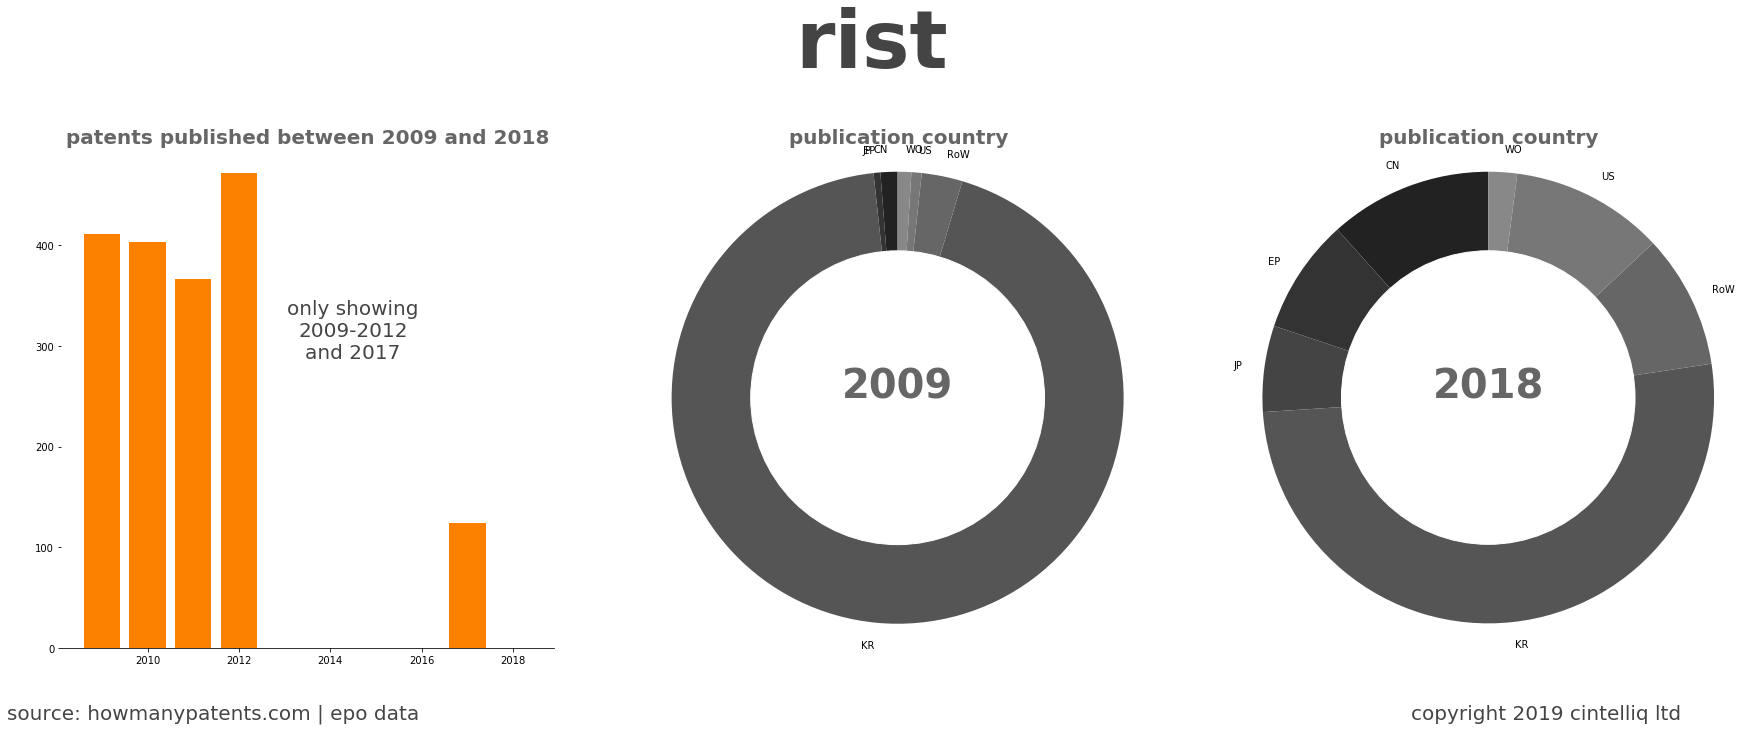 summary of patents for Rist